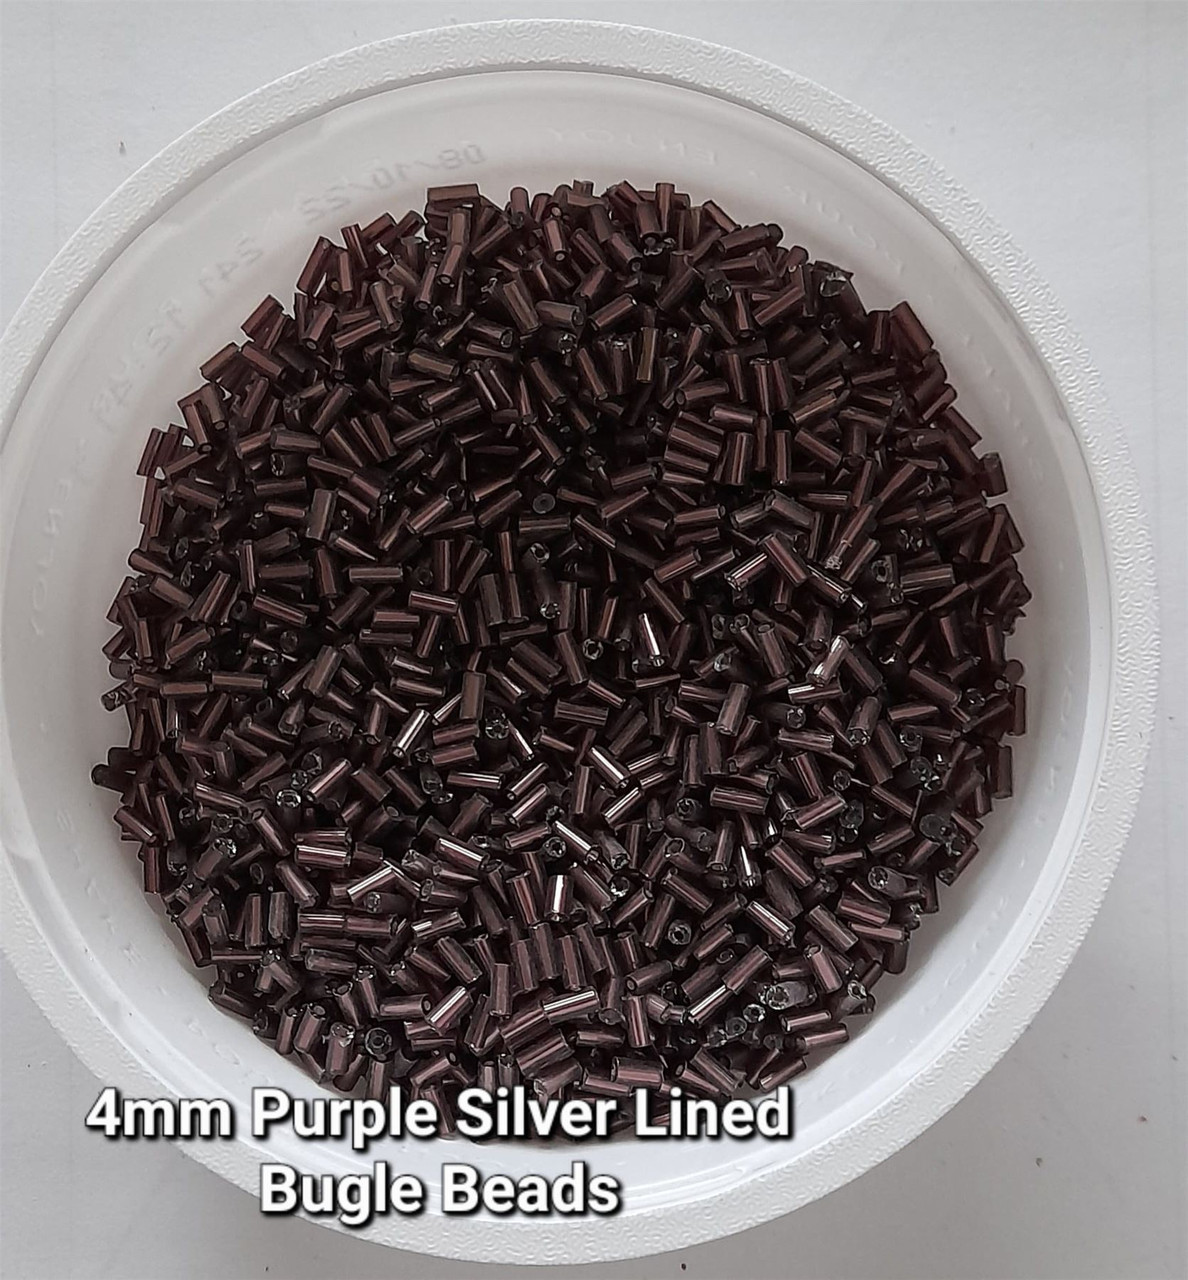 50g glass bugle beads - Purple Silver-Lined - approx 4mm